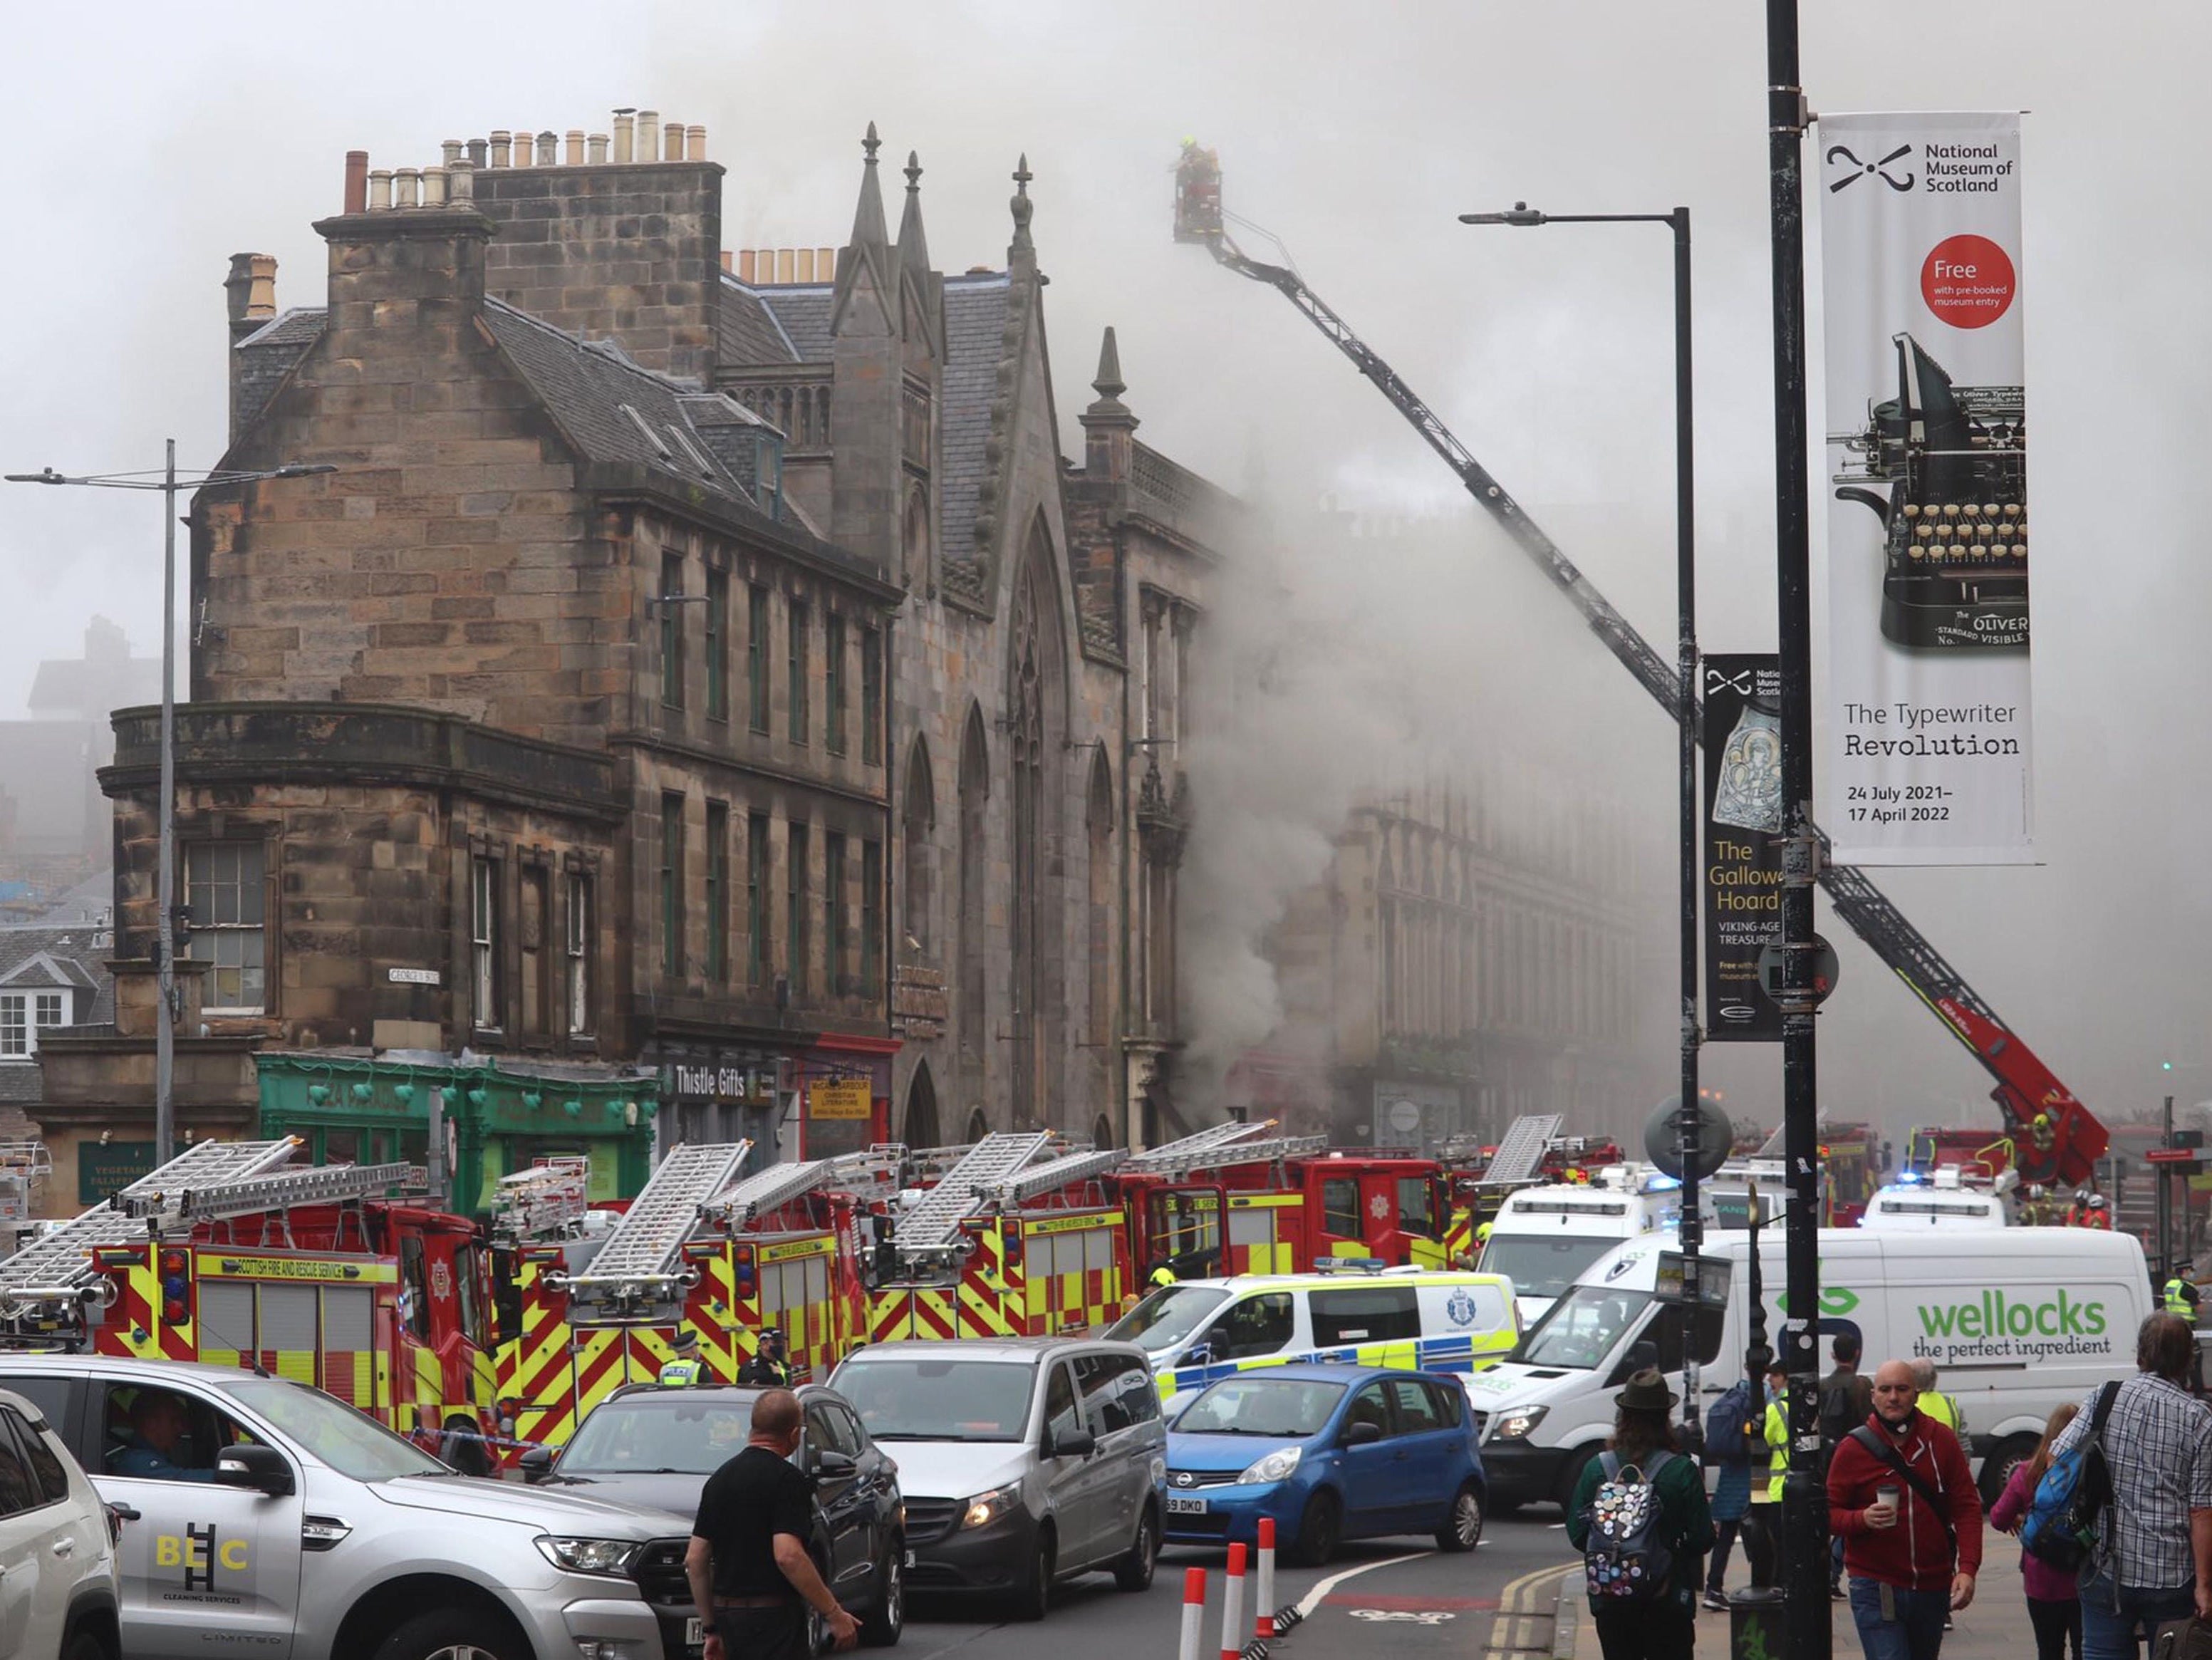 One person has been taken to hospital after a large fire closed the George IV Bridge in Edinburgh